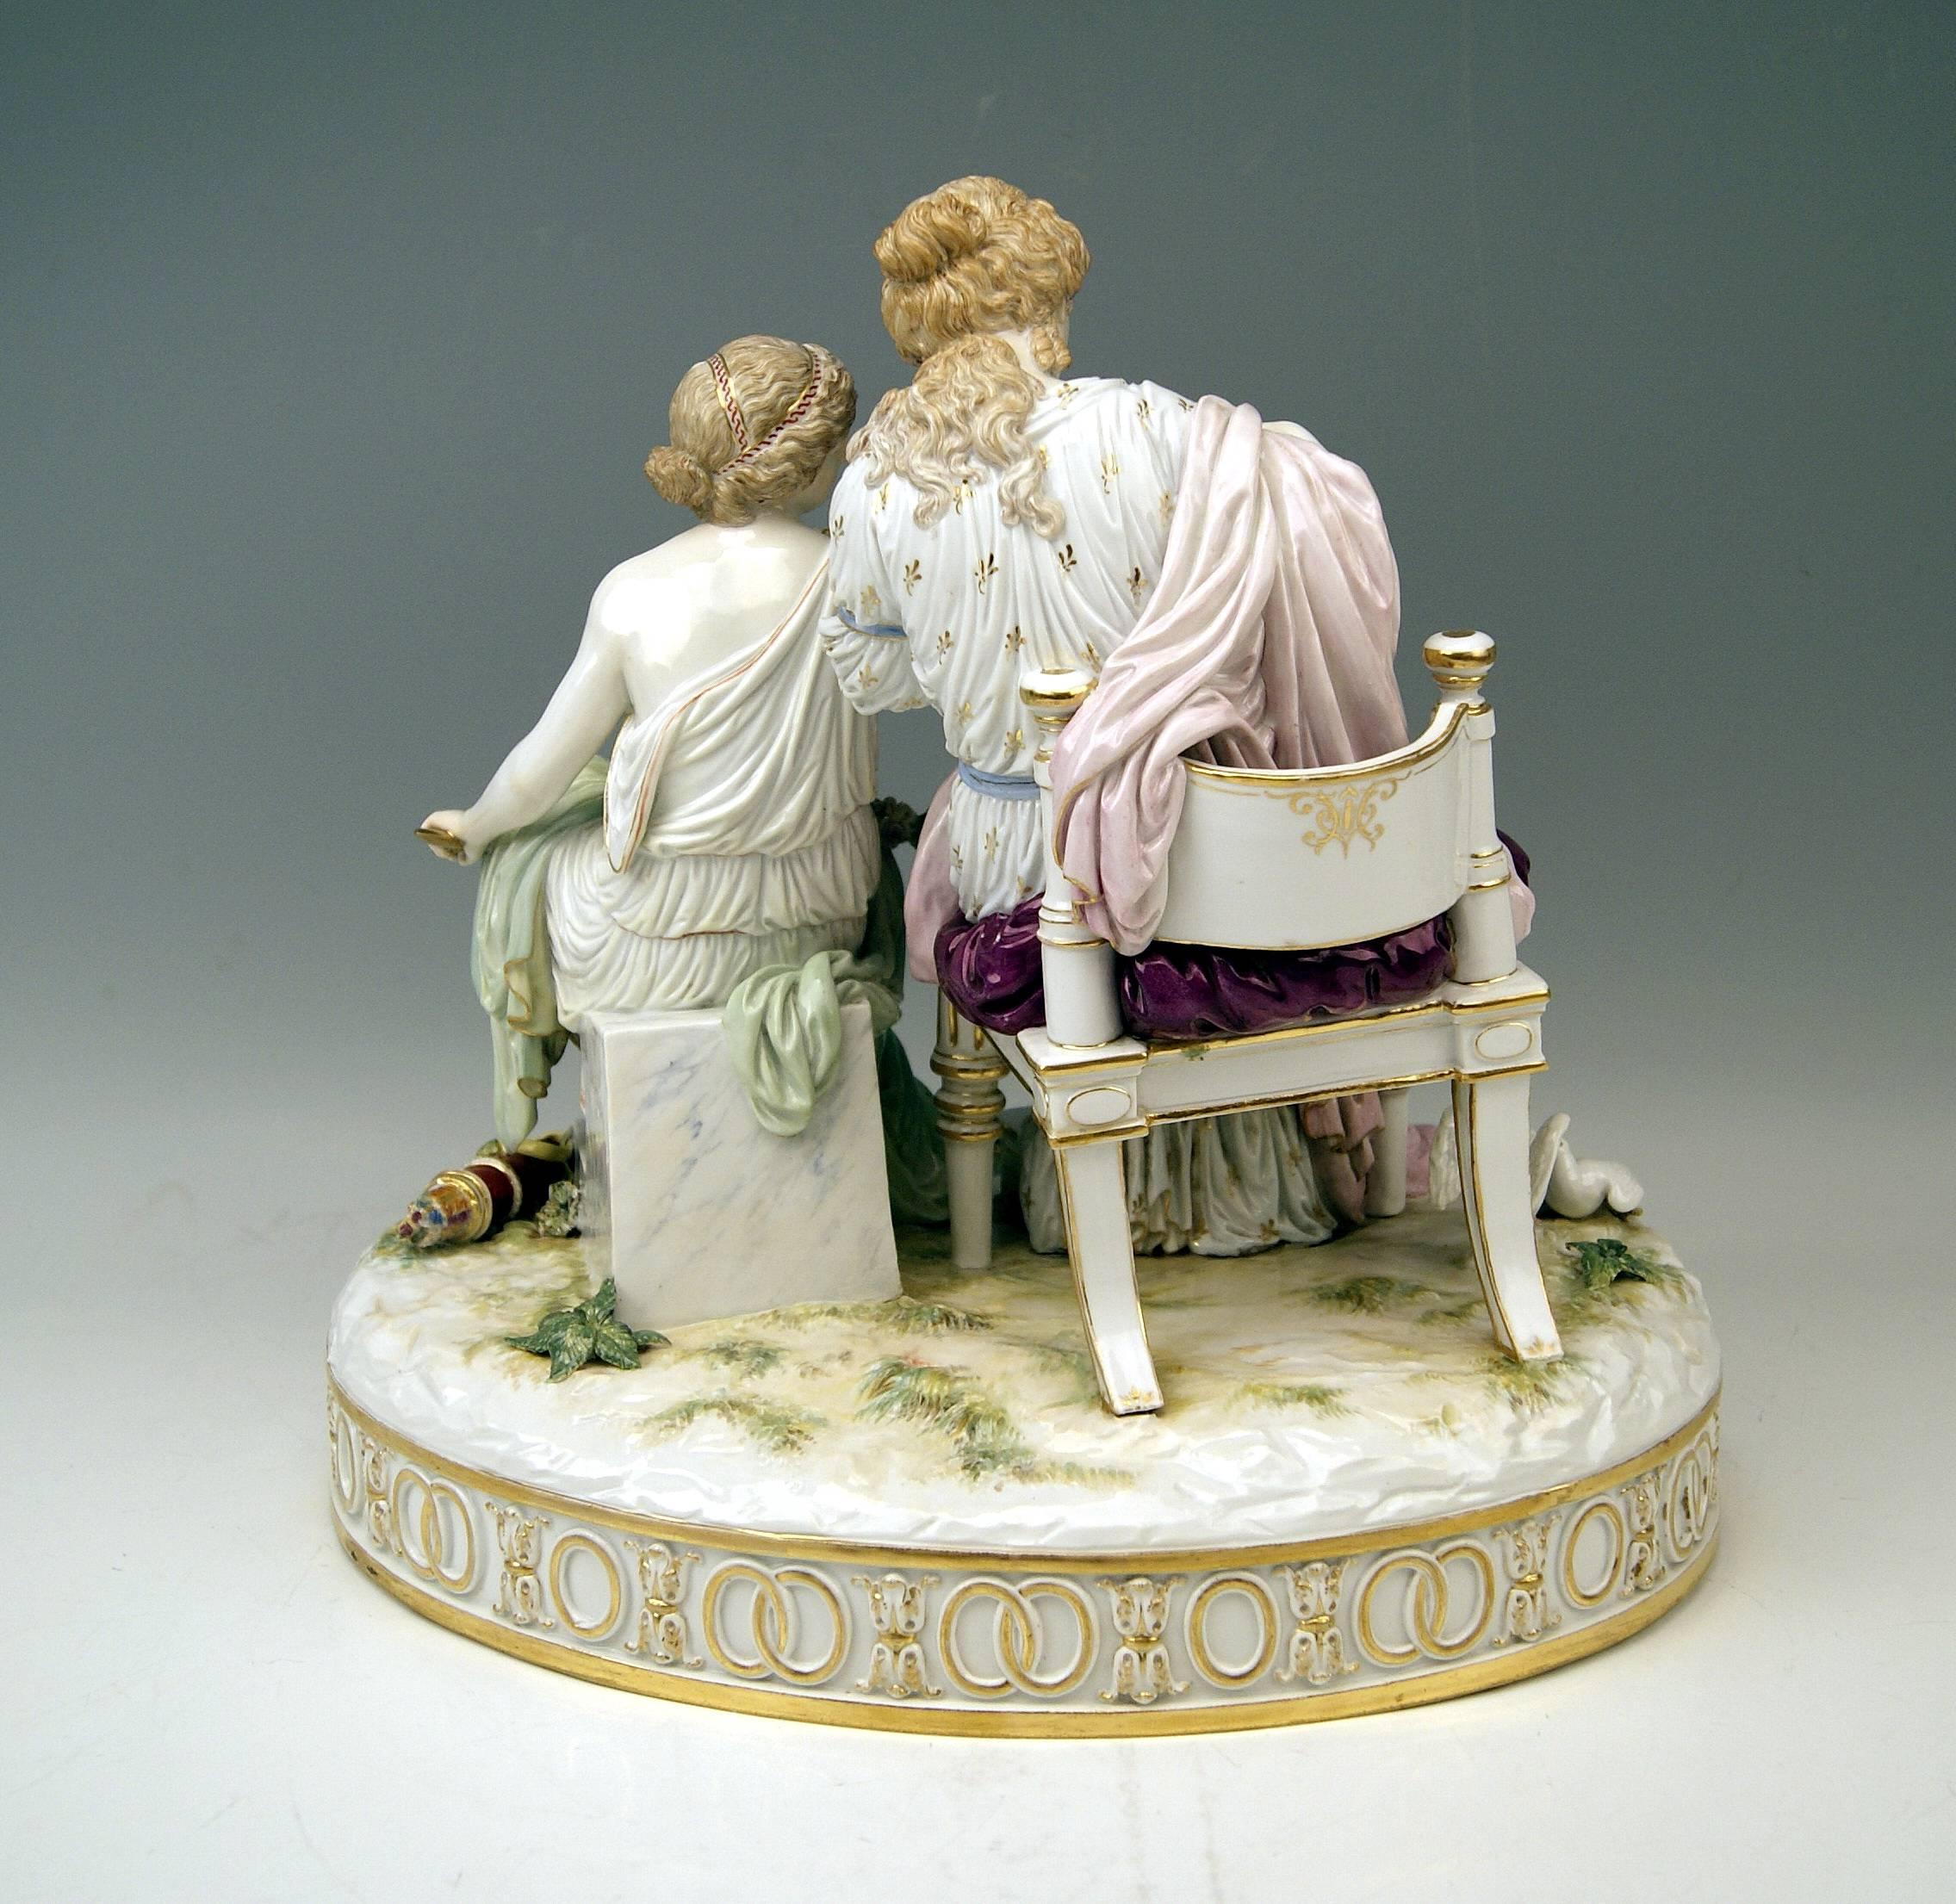 Neoclassical Meissen Tall Figurines Cupid in Dire Straits by C. G. Juechtzer, circa 1870 